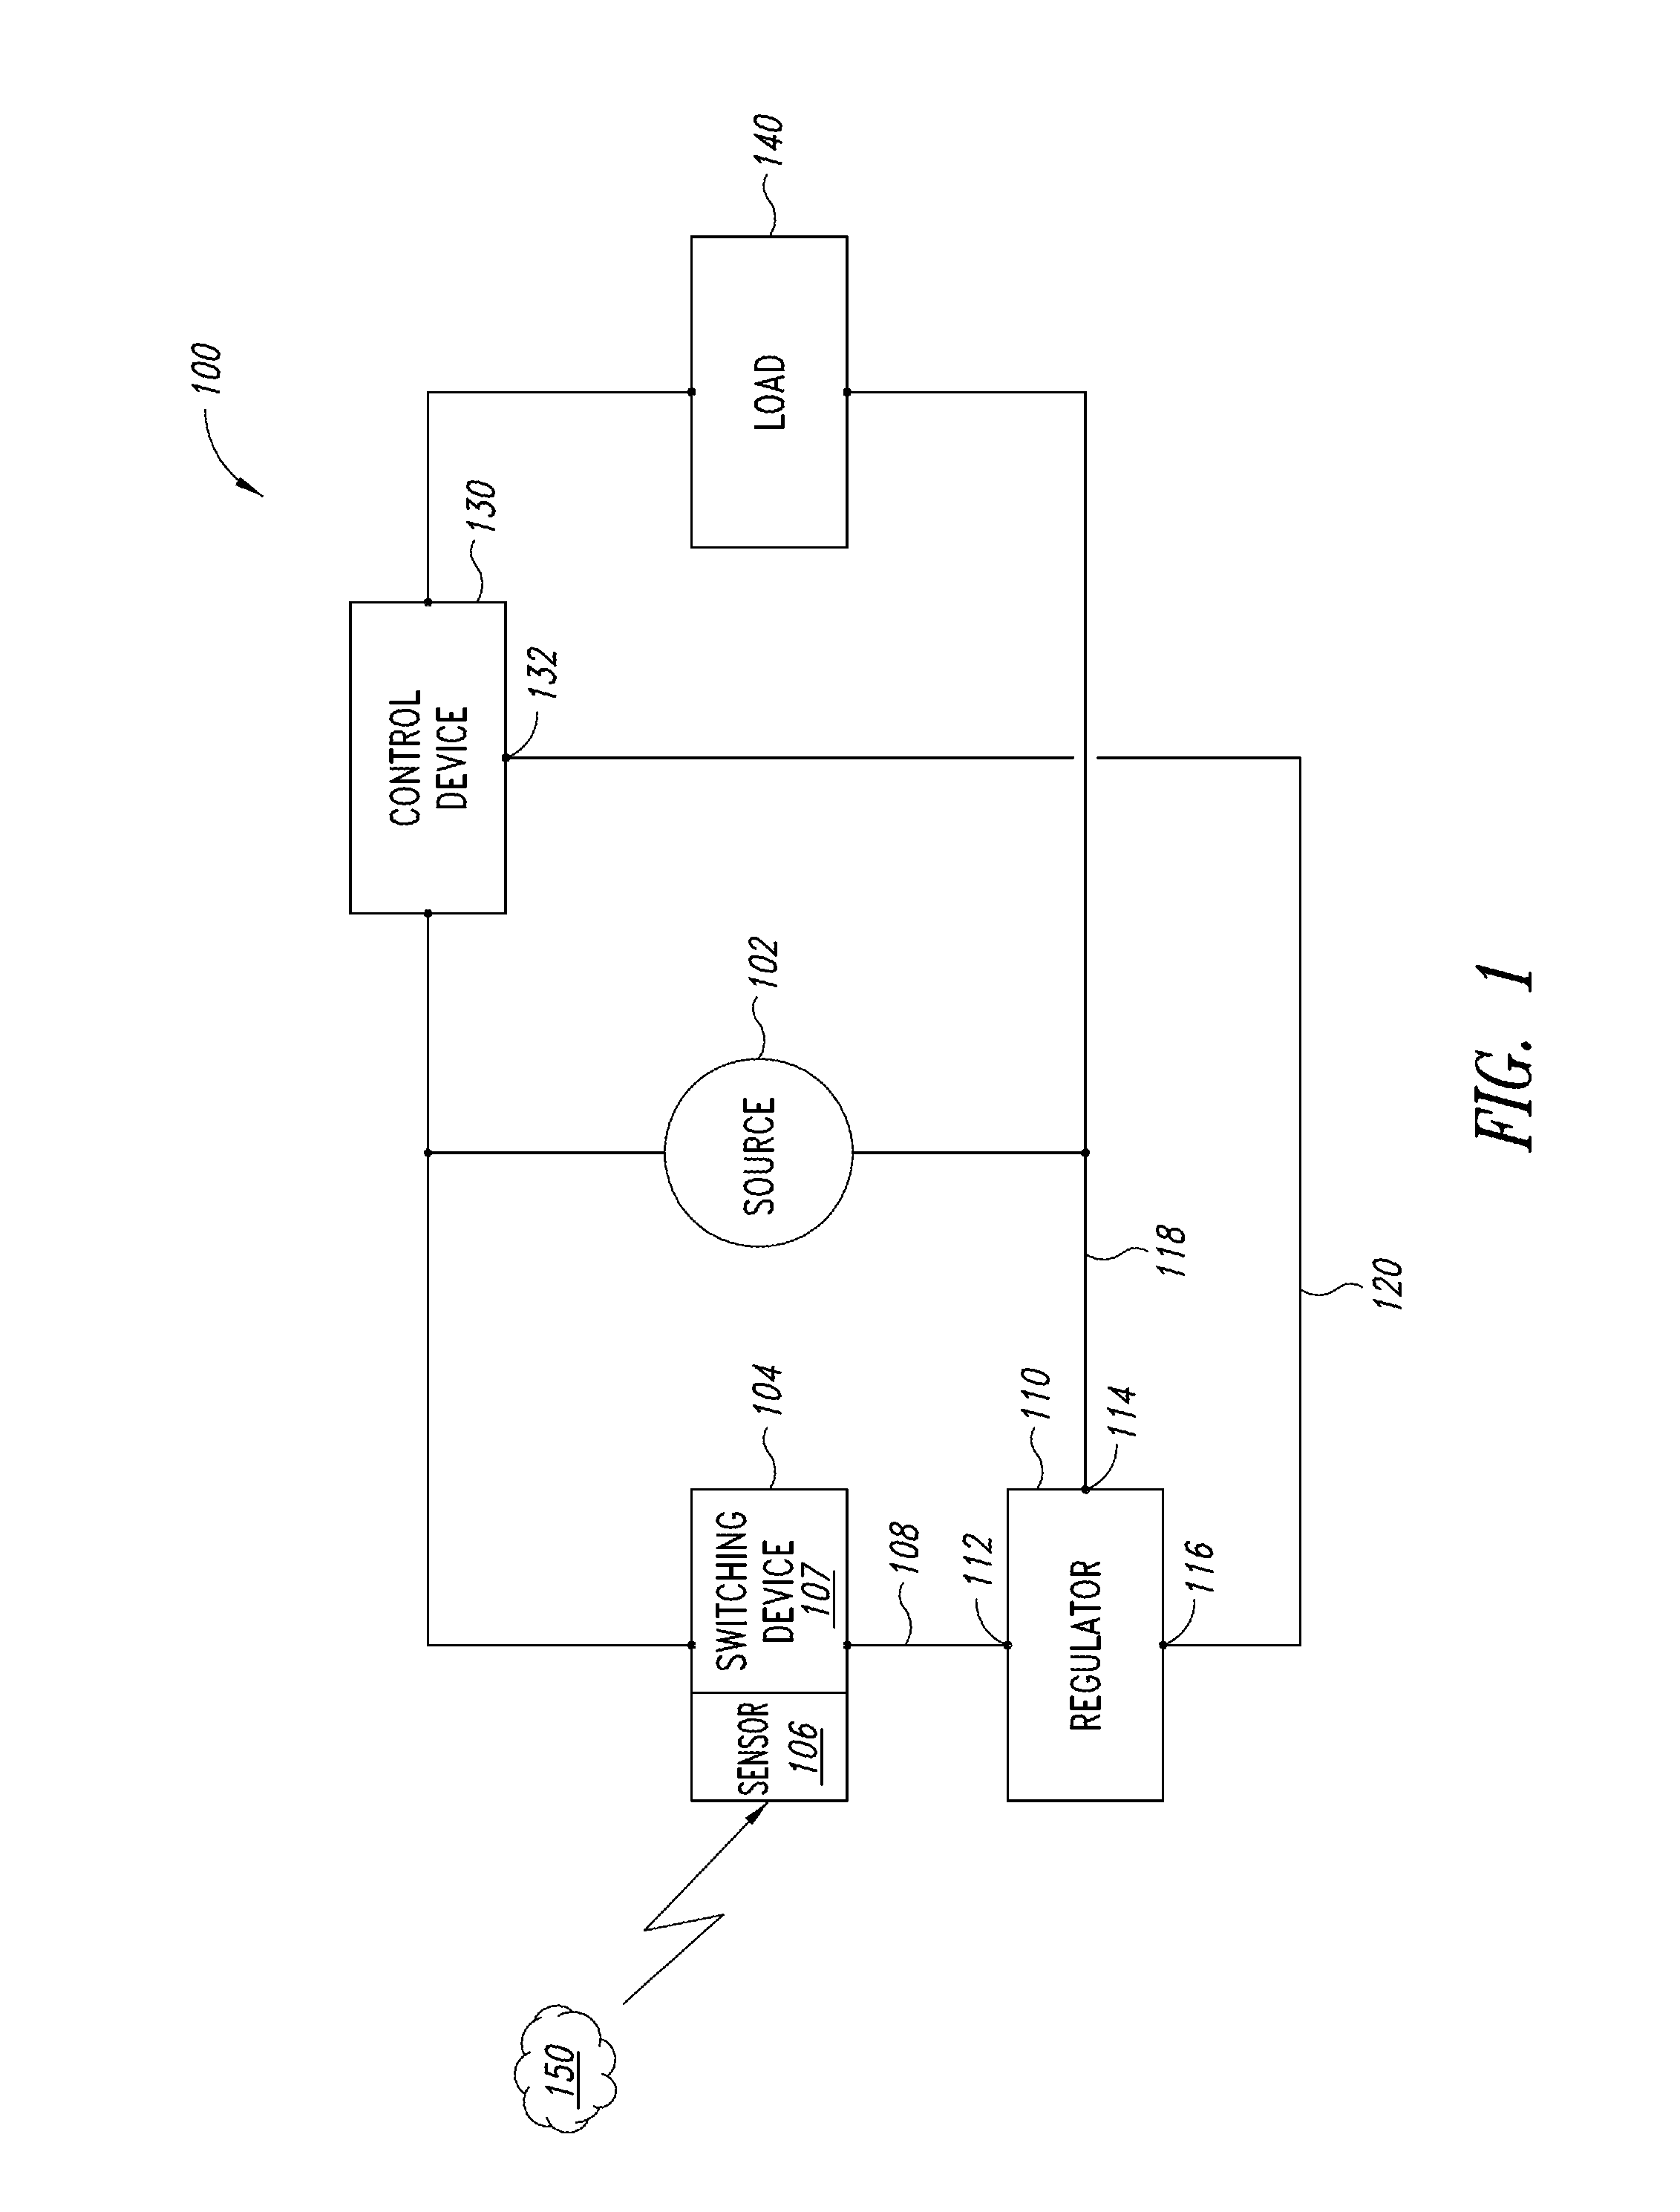 Systems, methods, and apparatuses for using a high current switching device as a logic level sensor